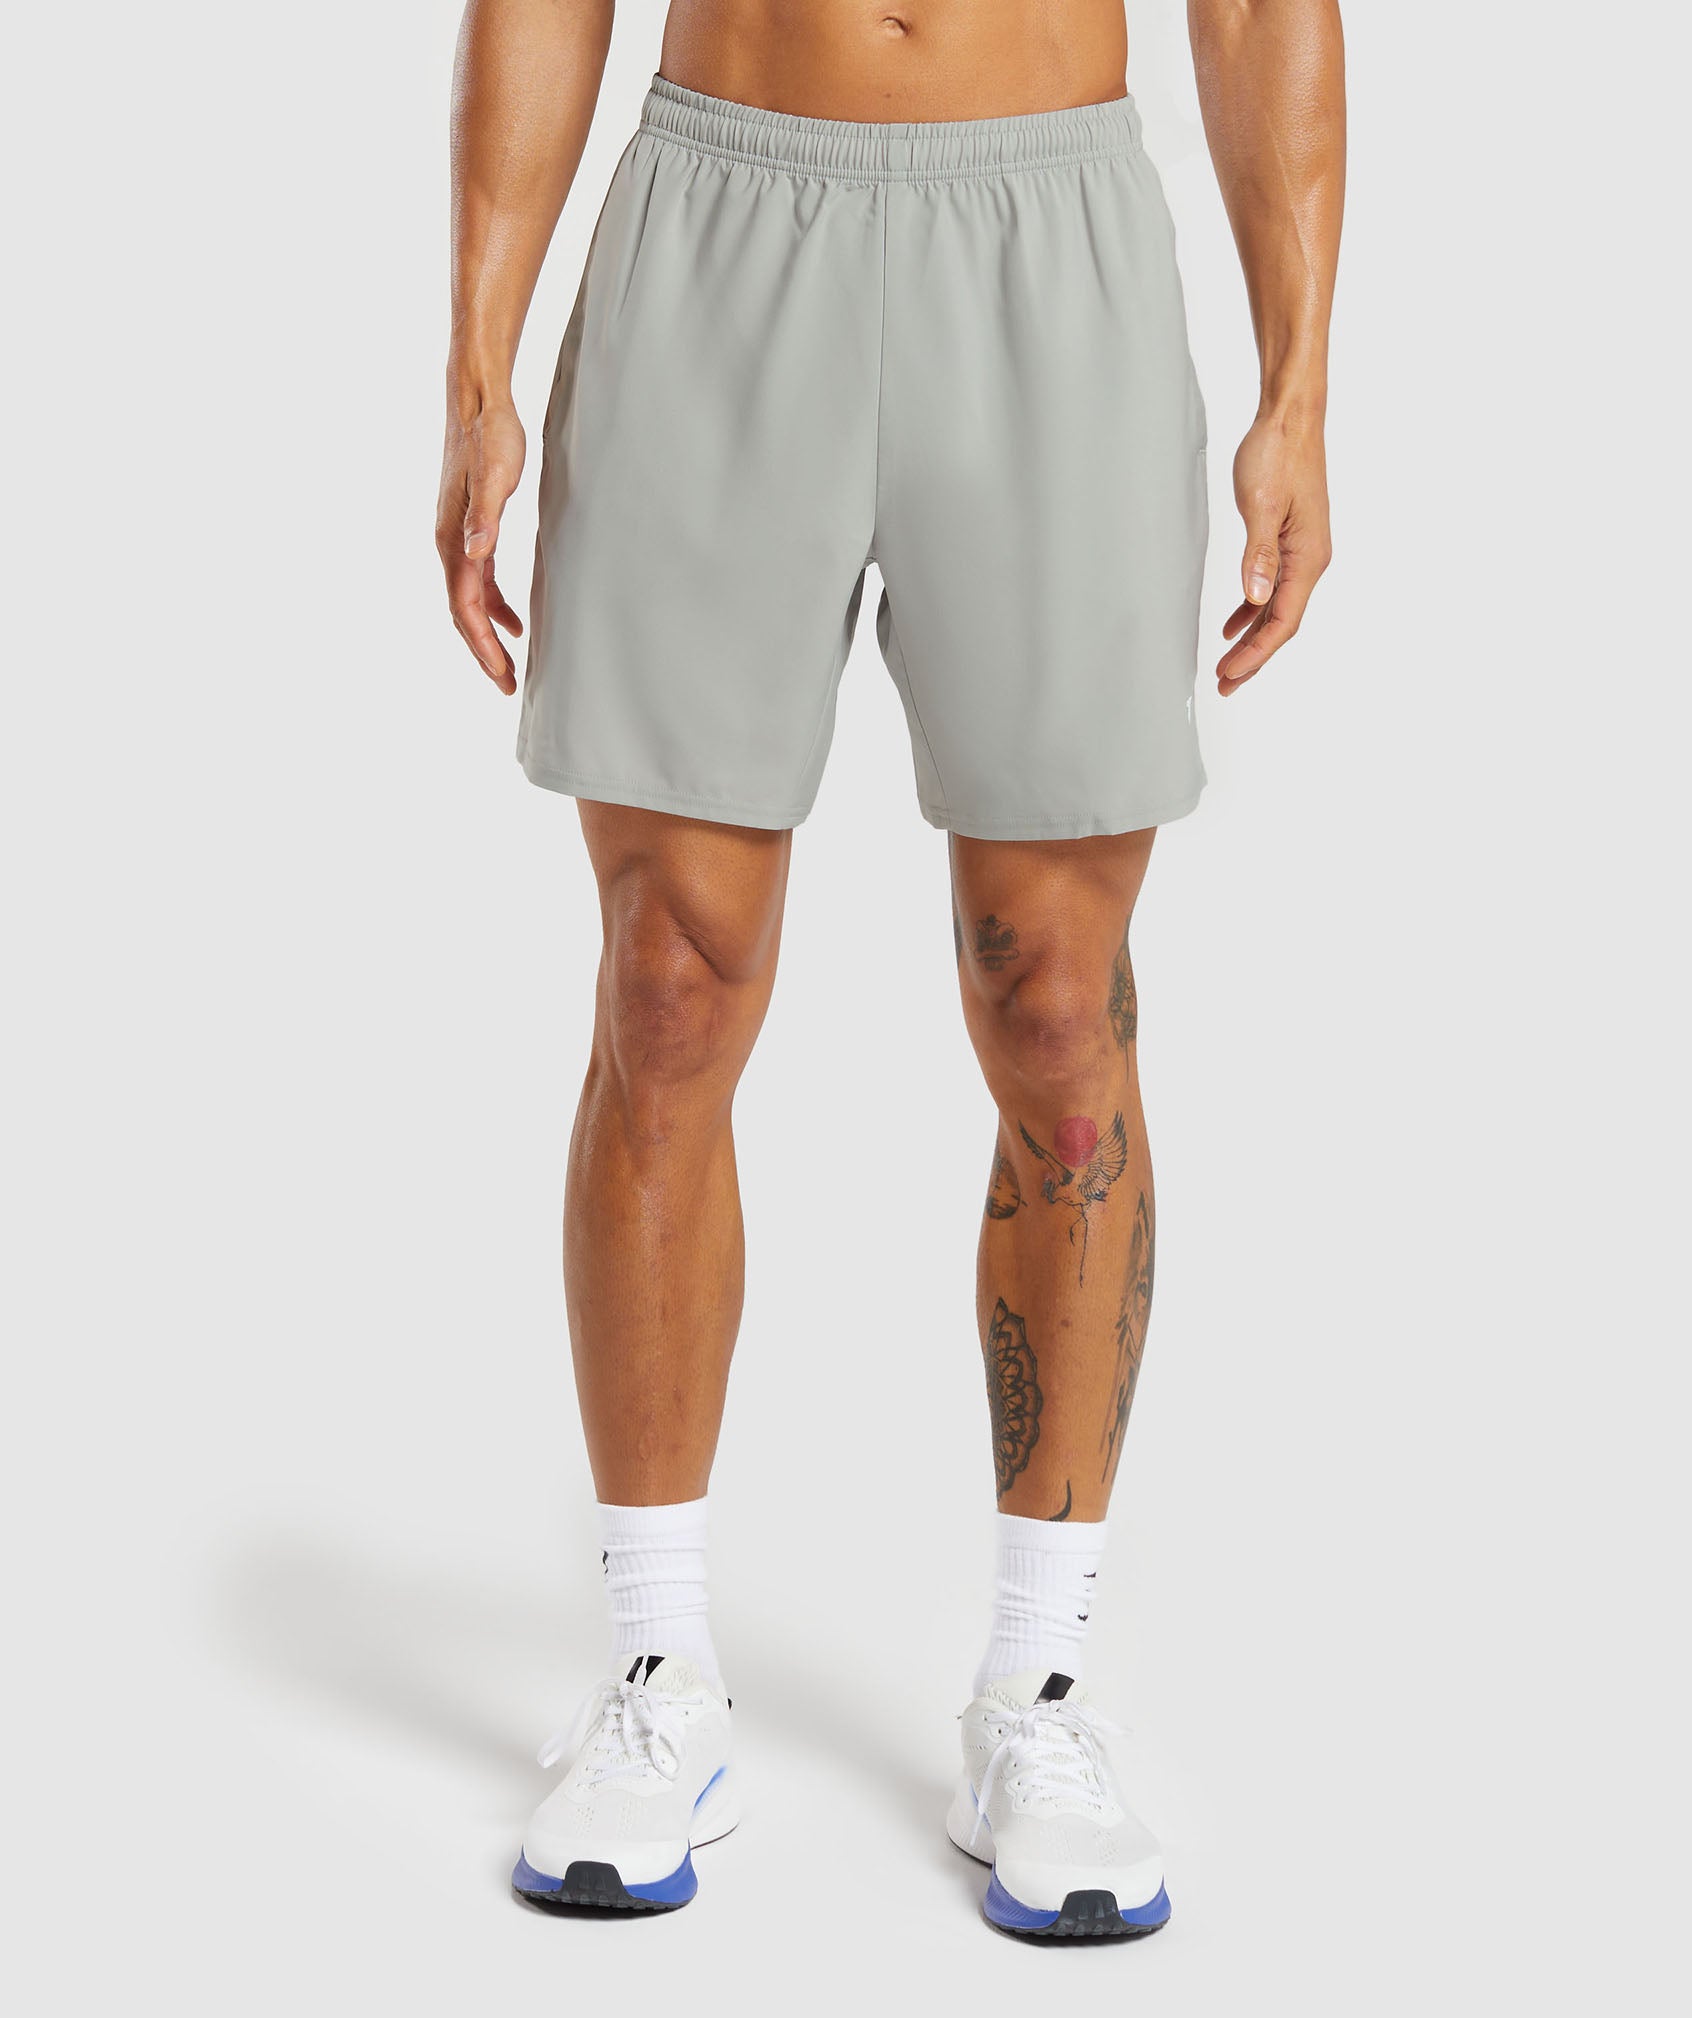 Arrival 7" Shorts in Stone Grey - view 1